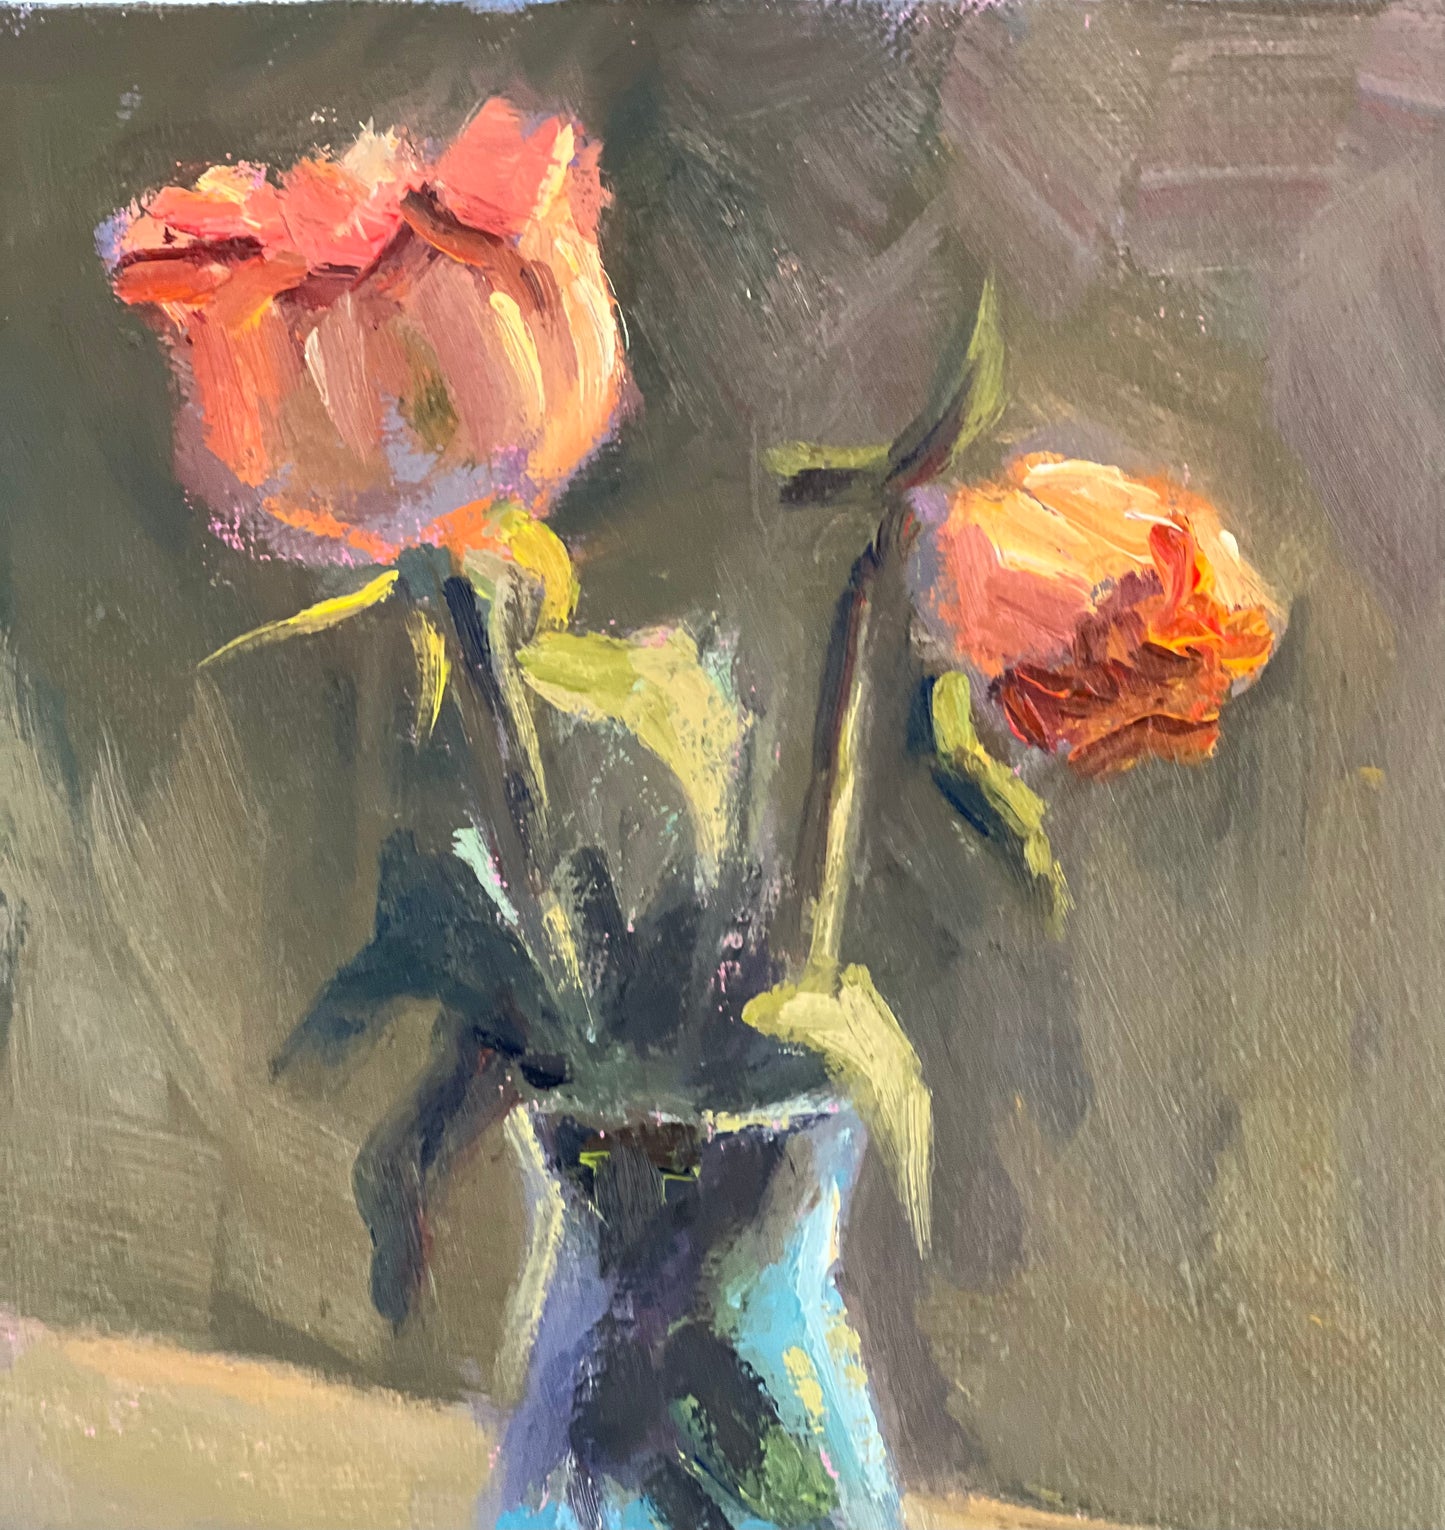 Oil Painting of Roses - Orange roses by the window